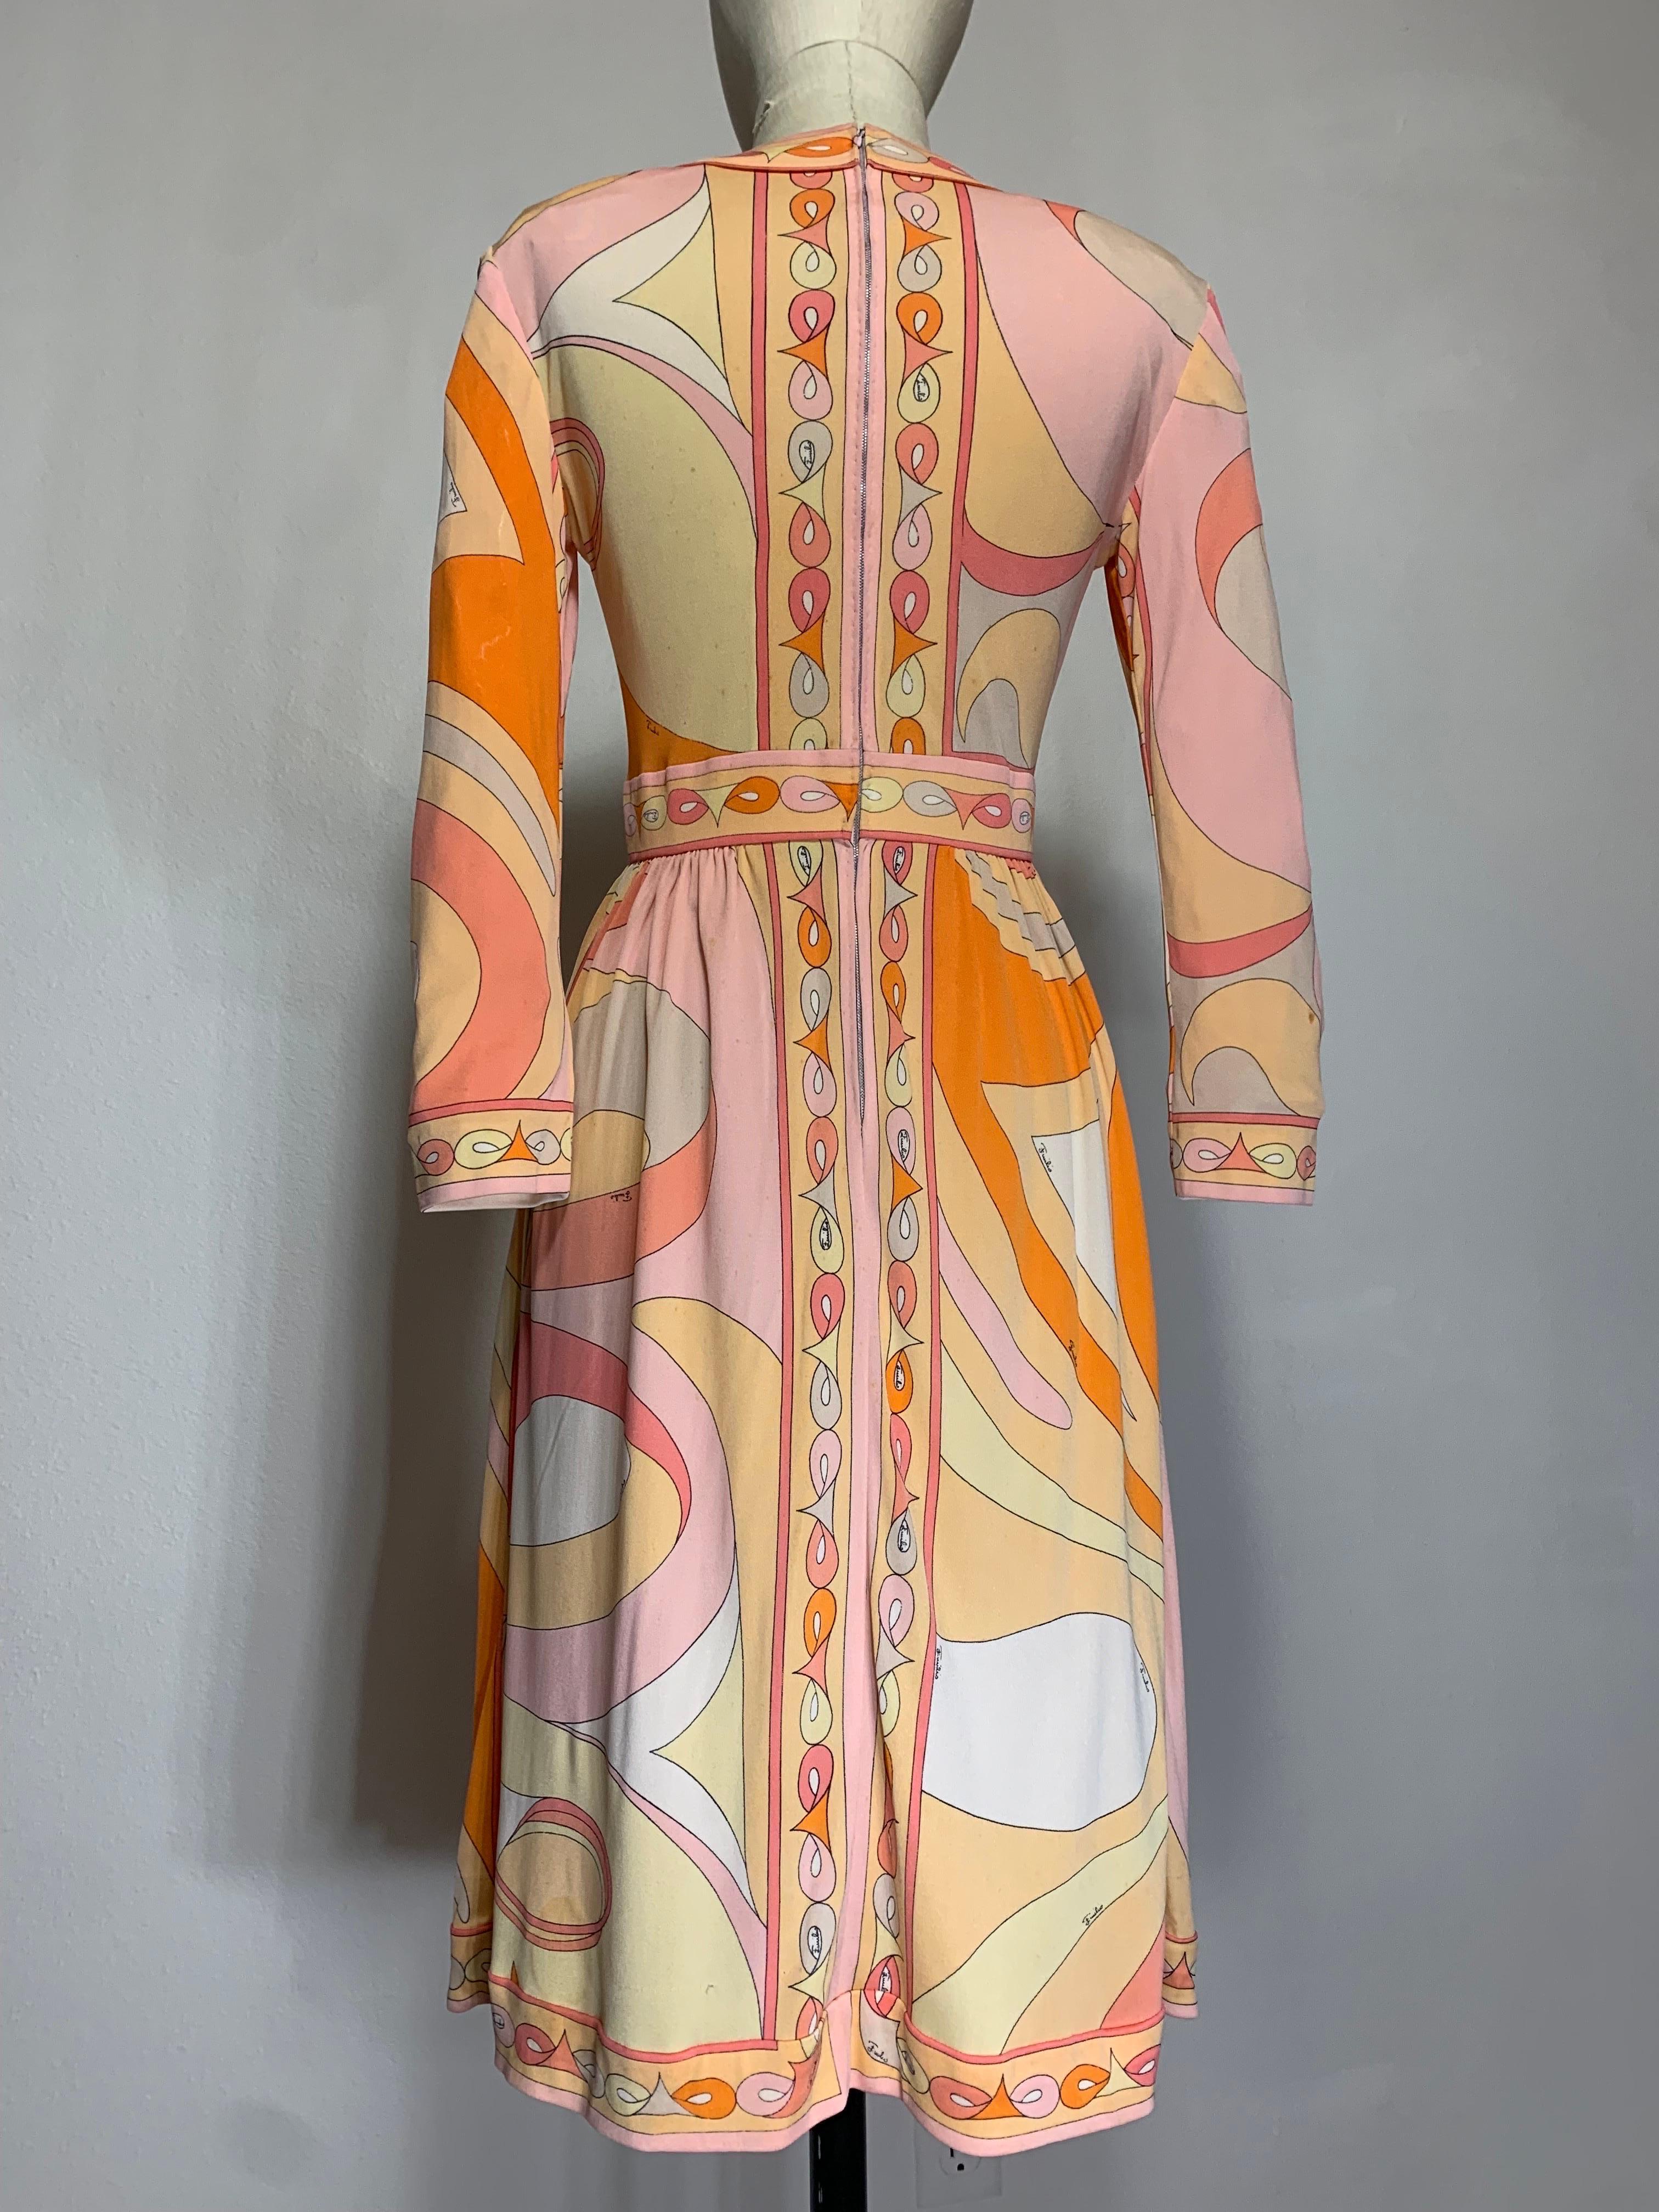 1960er Emilio Pucci Psychedelic Print Mod Day Dress w Full Skirt in Tangerine  im Angebot 10